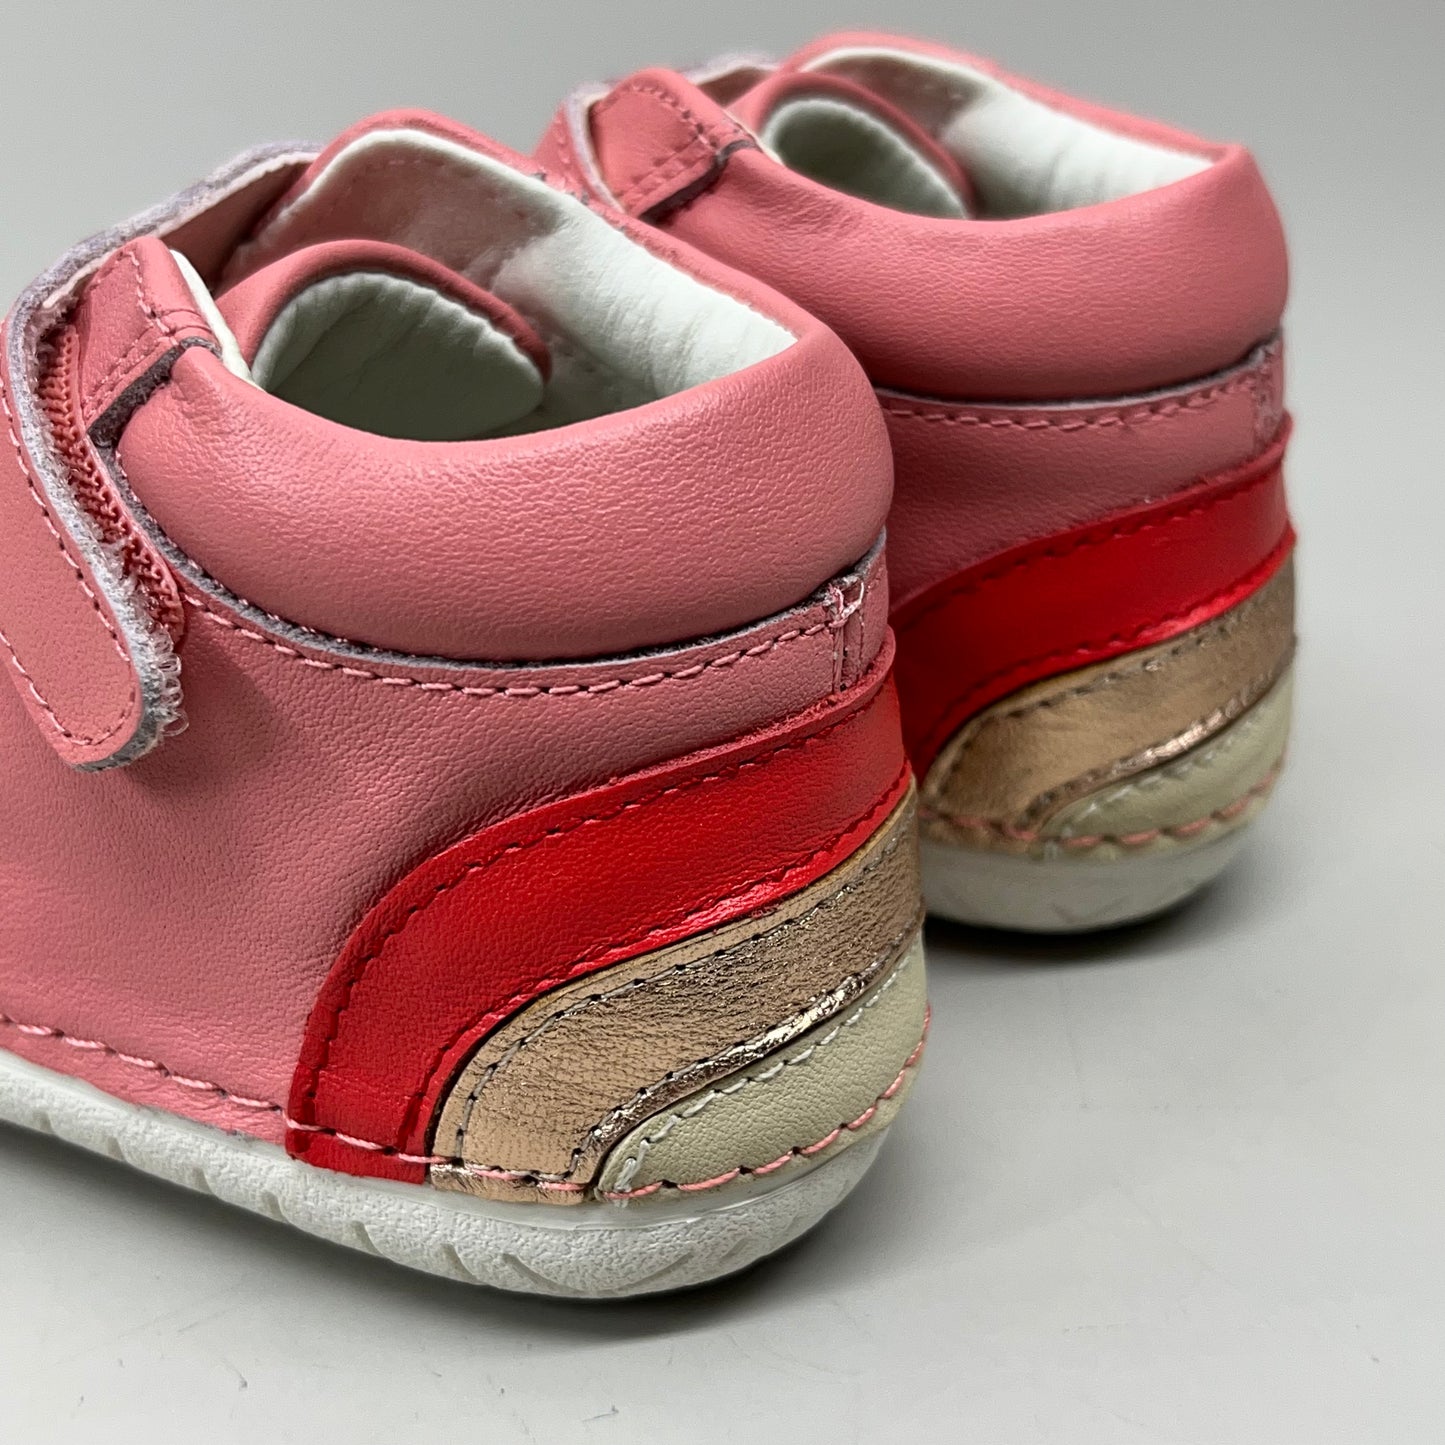 OLD SOLES Baby Rainbow Champster Leather Shoe Sz 23 US 7 Rossini/Red/Copper/Cream #4091